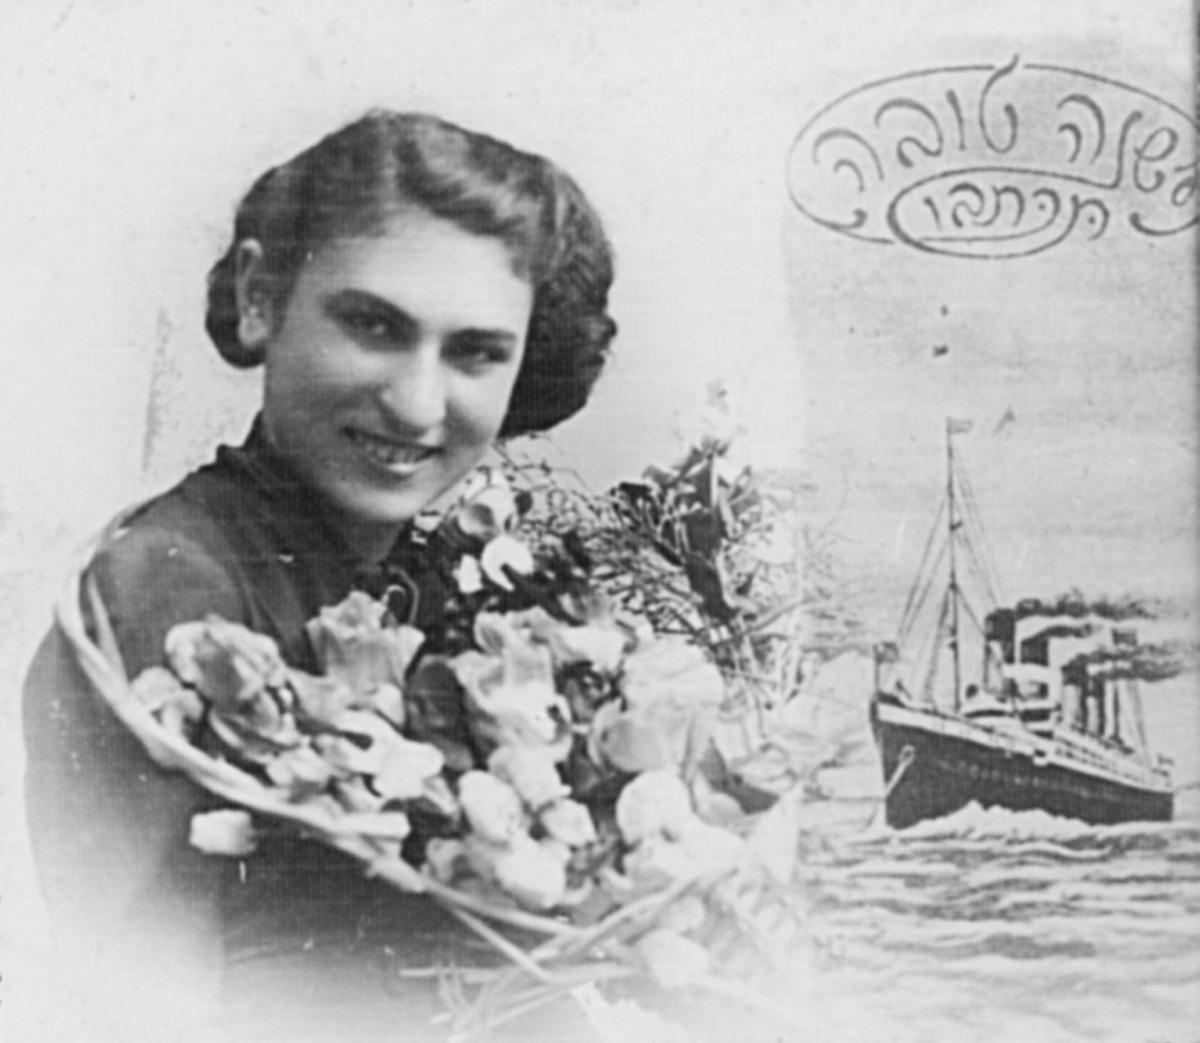 New Year's card with a portrait of Henia Lubliner, which she sent from Siedlce, Poland to her sister Esther in Eretz Israel